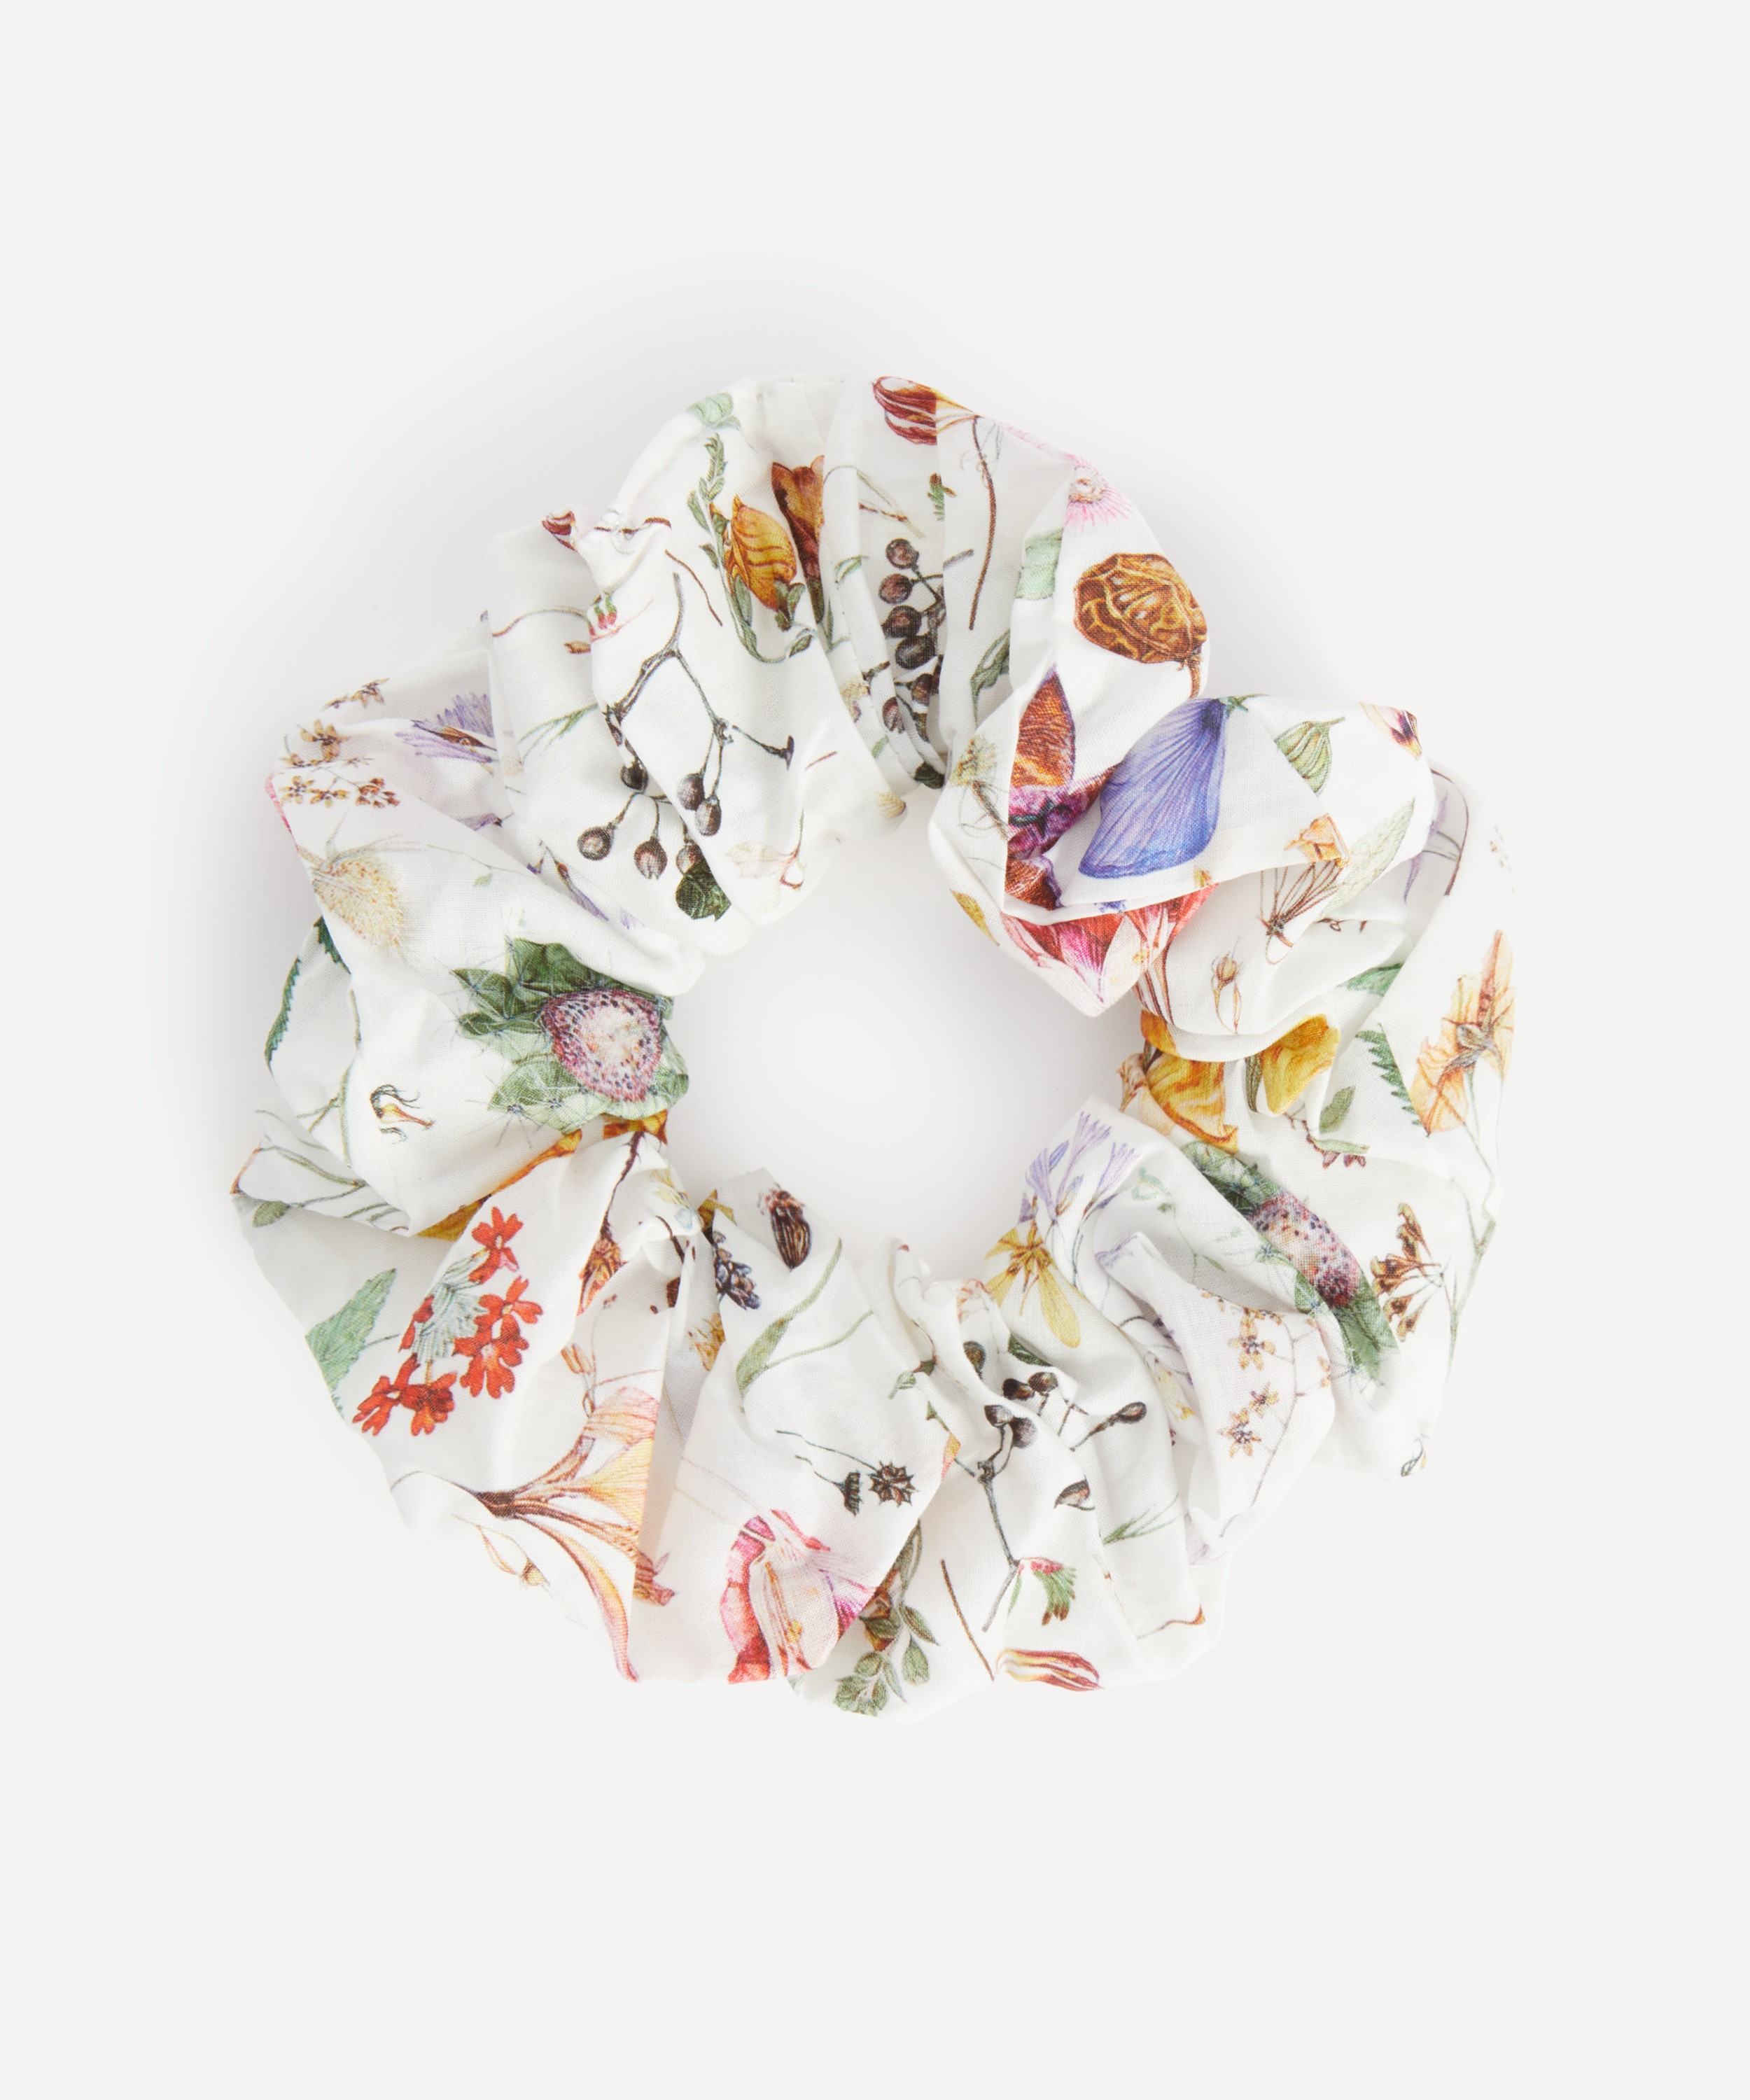 Liberty - Floral Eve Tana Lawn™ Cotton Hair Scrunchie image number 0